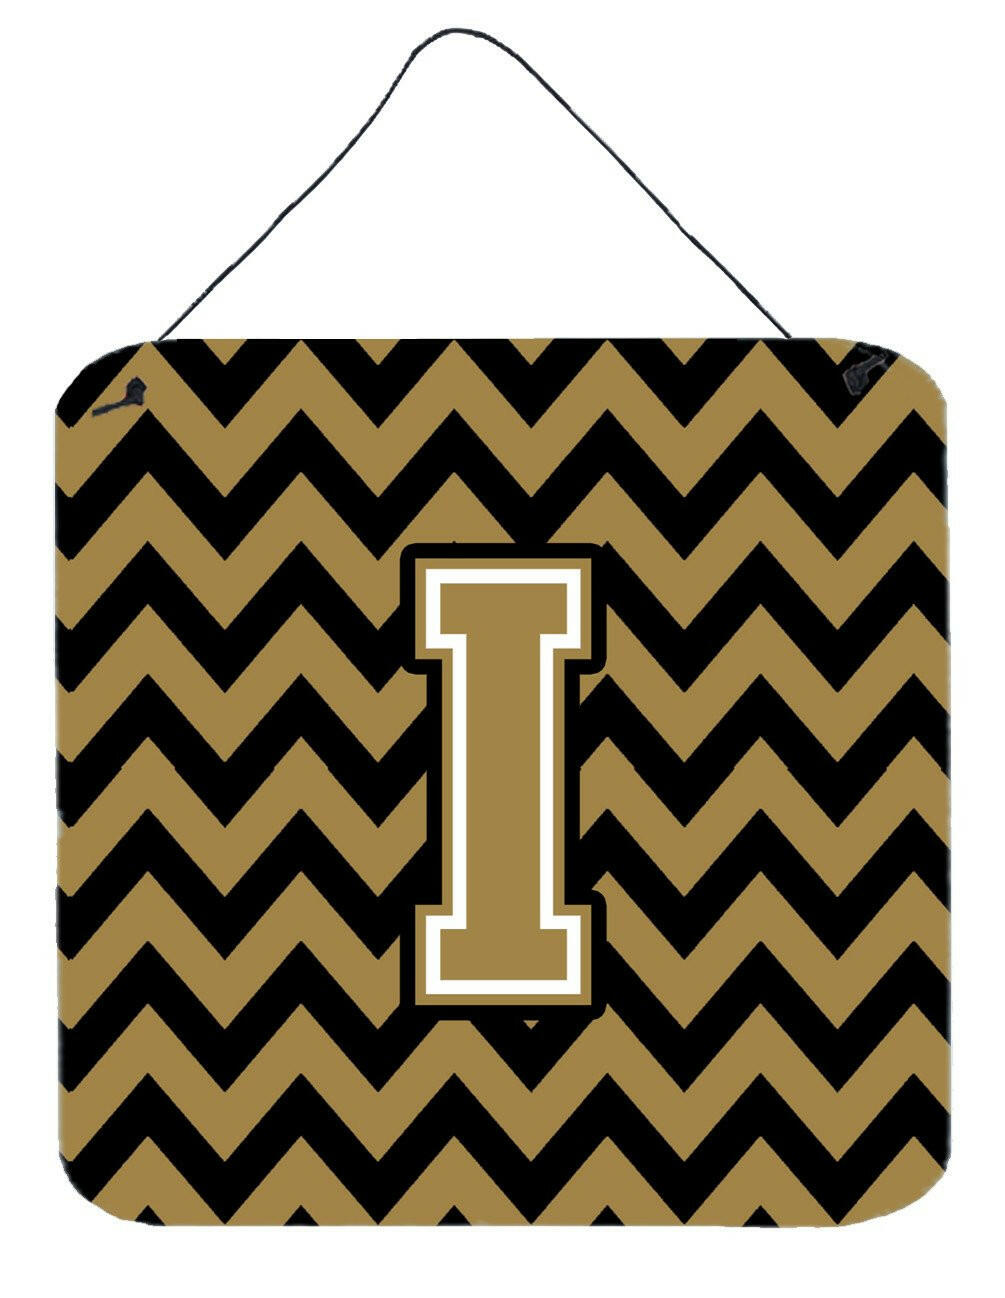 Letter I Chevron Black and Gold  Wall or Door Hanging Prints CJ1050-IDS66 by Caroline's Treasures